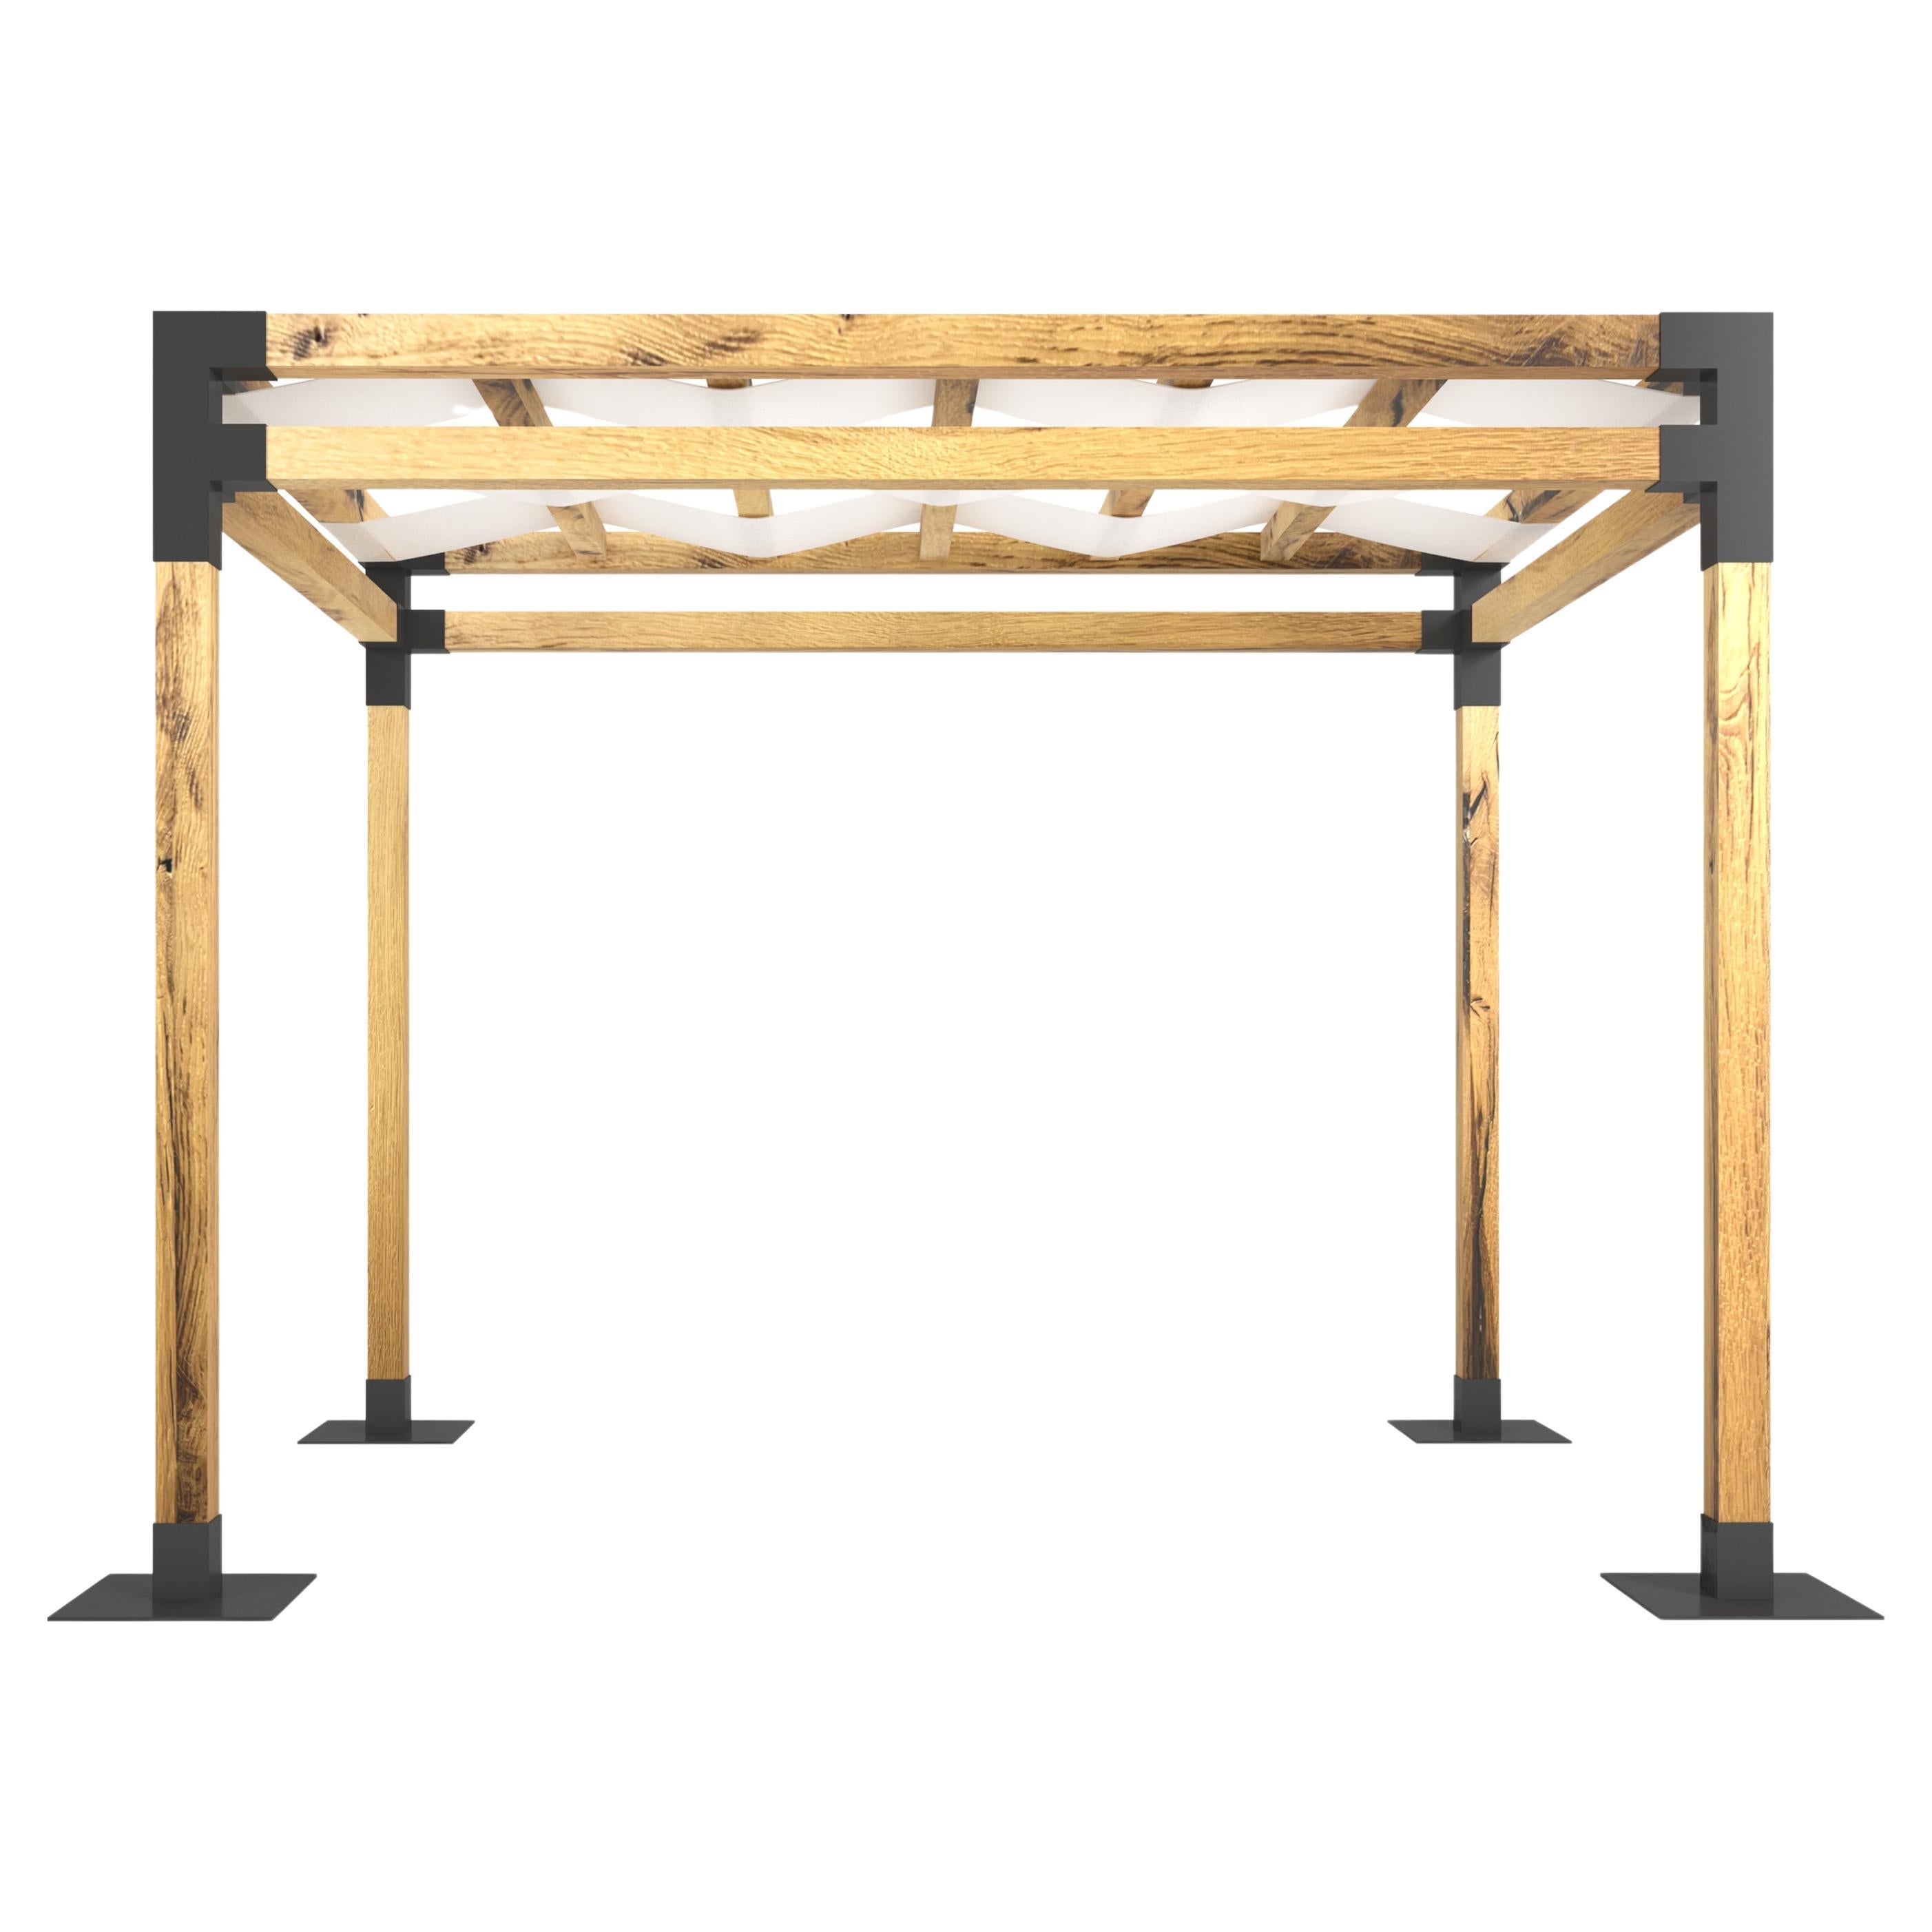 Enjoy a unique dining experience with the Reclaimed Oak Pergola. It is crafted from reclaimed massive oak wood, with its origins dating back to the 1830s. 

All Tektōn pieces are made of natural massive wood.
Small variations may be found due to the